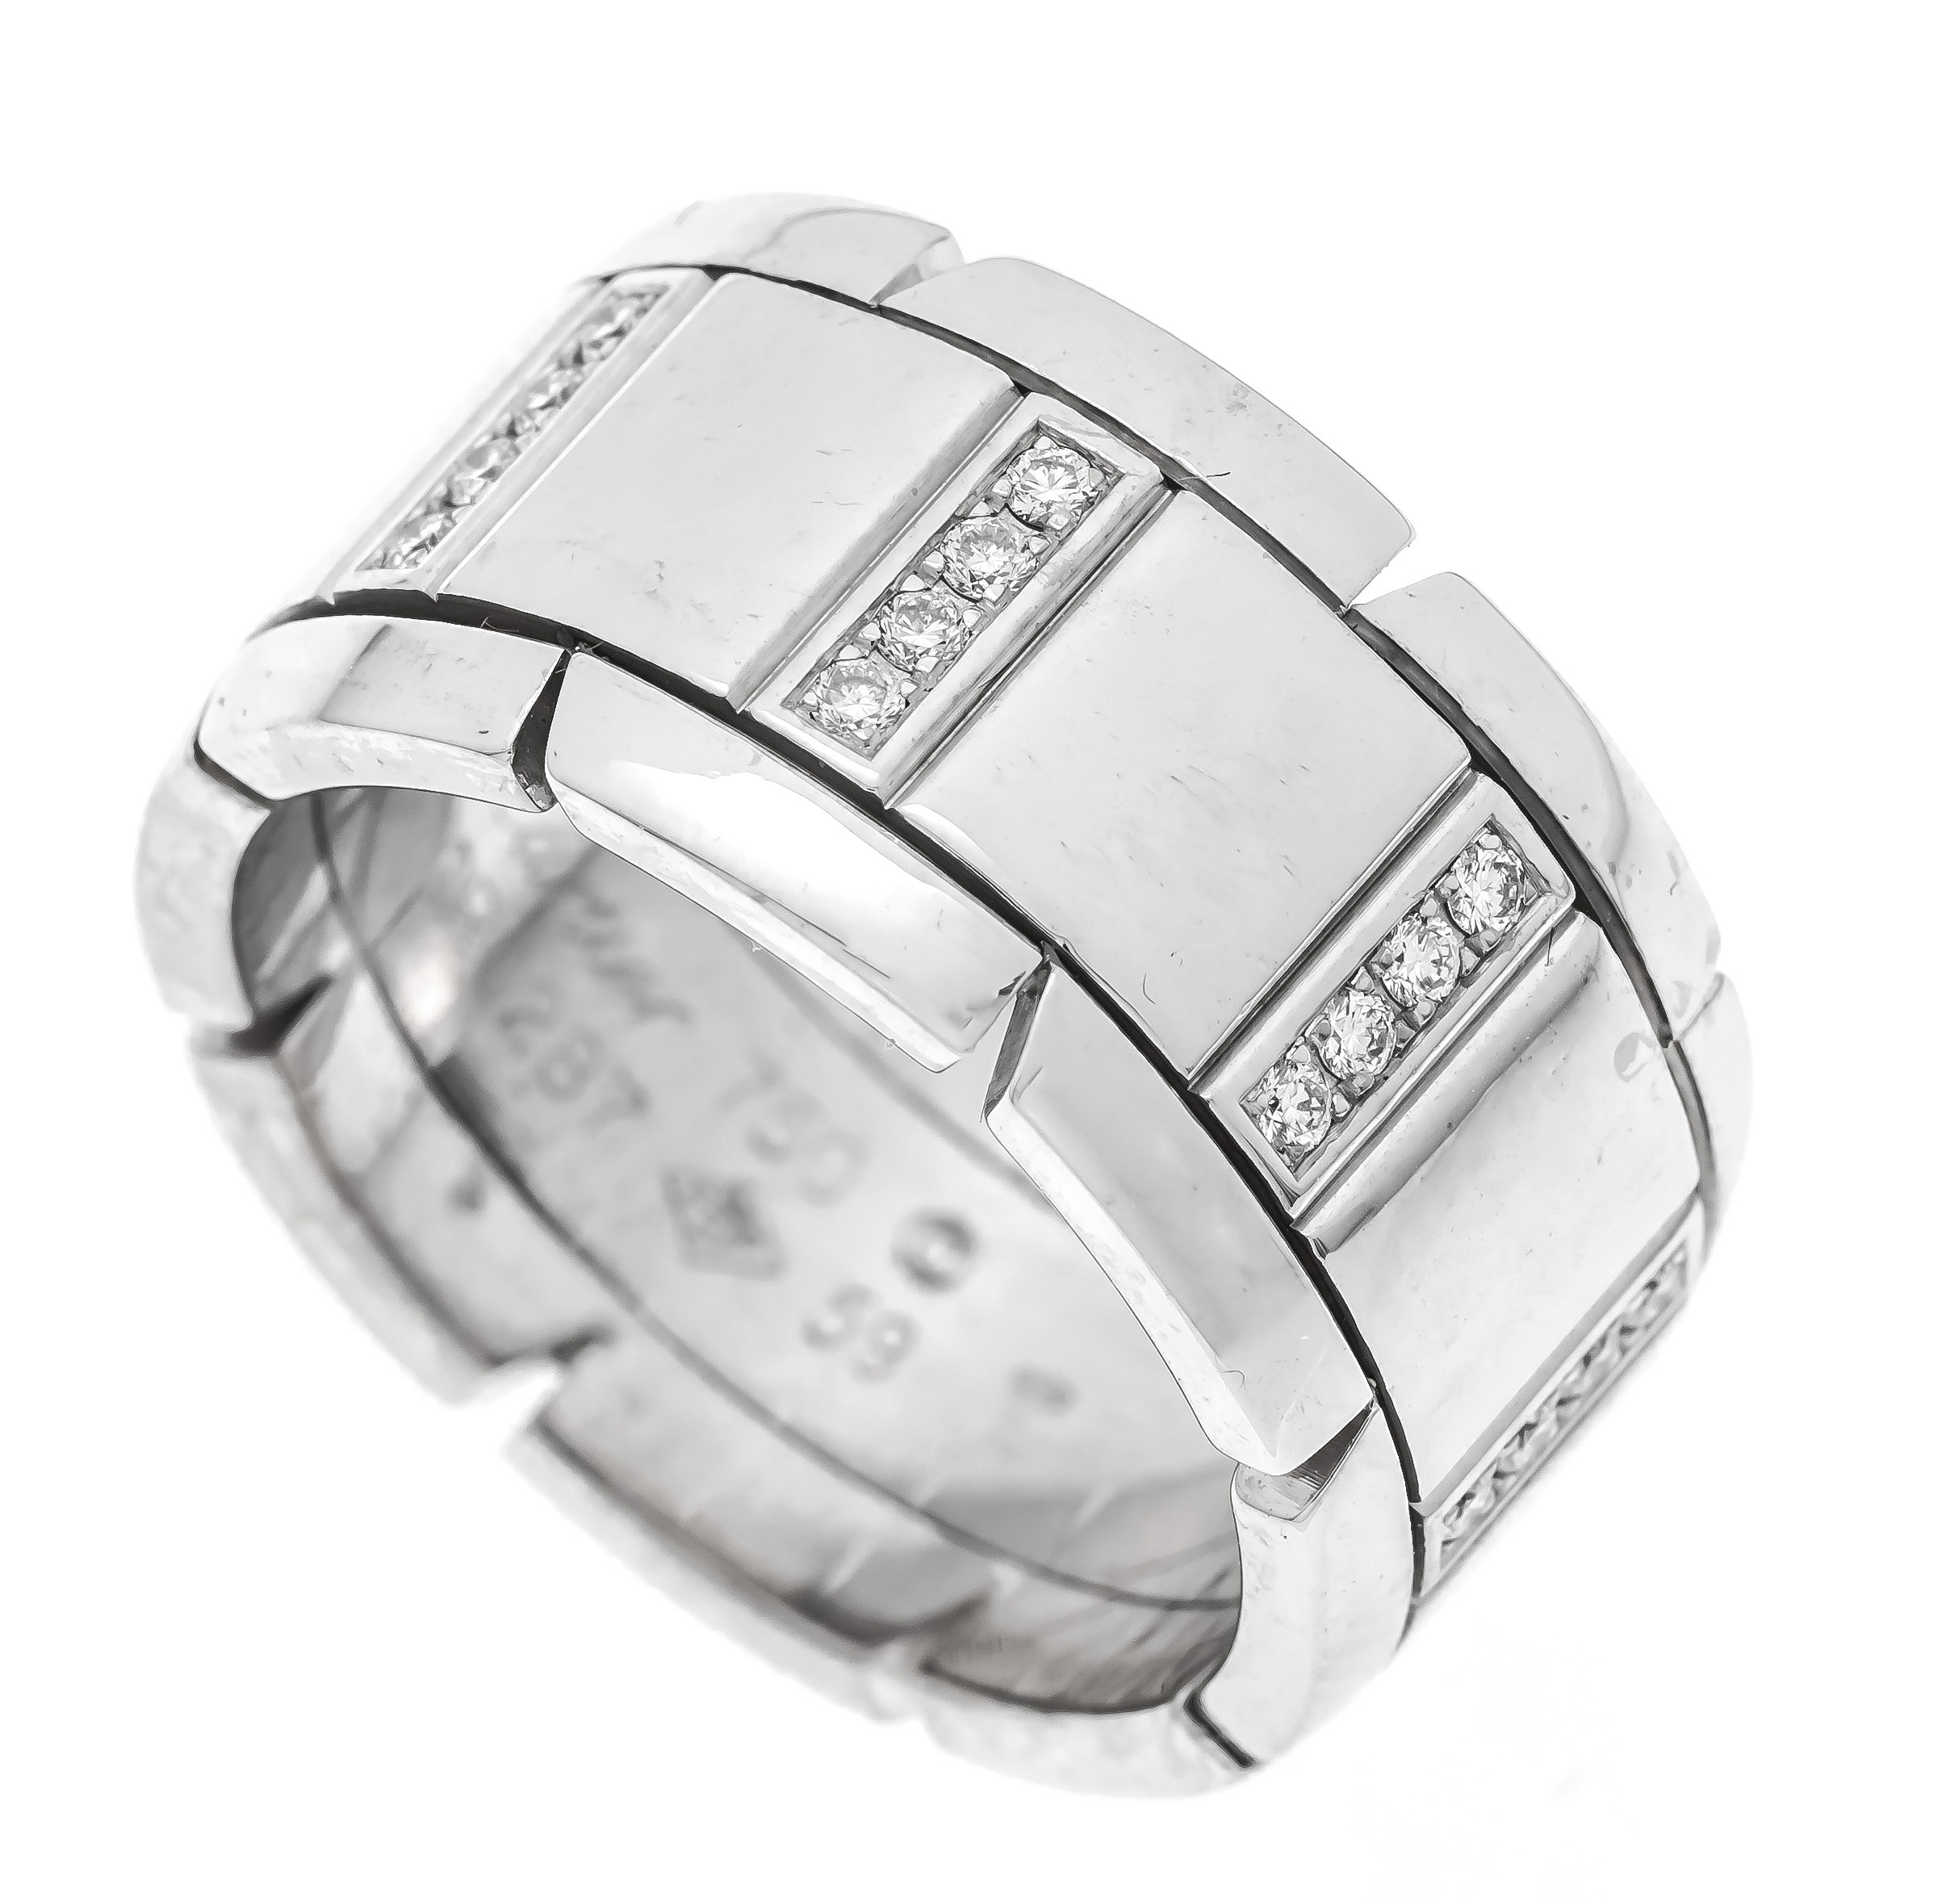 Tank Cartier ring WG 750/000 with 32 brilliant-cut diamonds, total 0.32 ct TW/VS, RG 58, Cartier